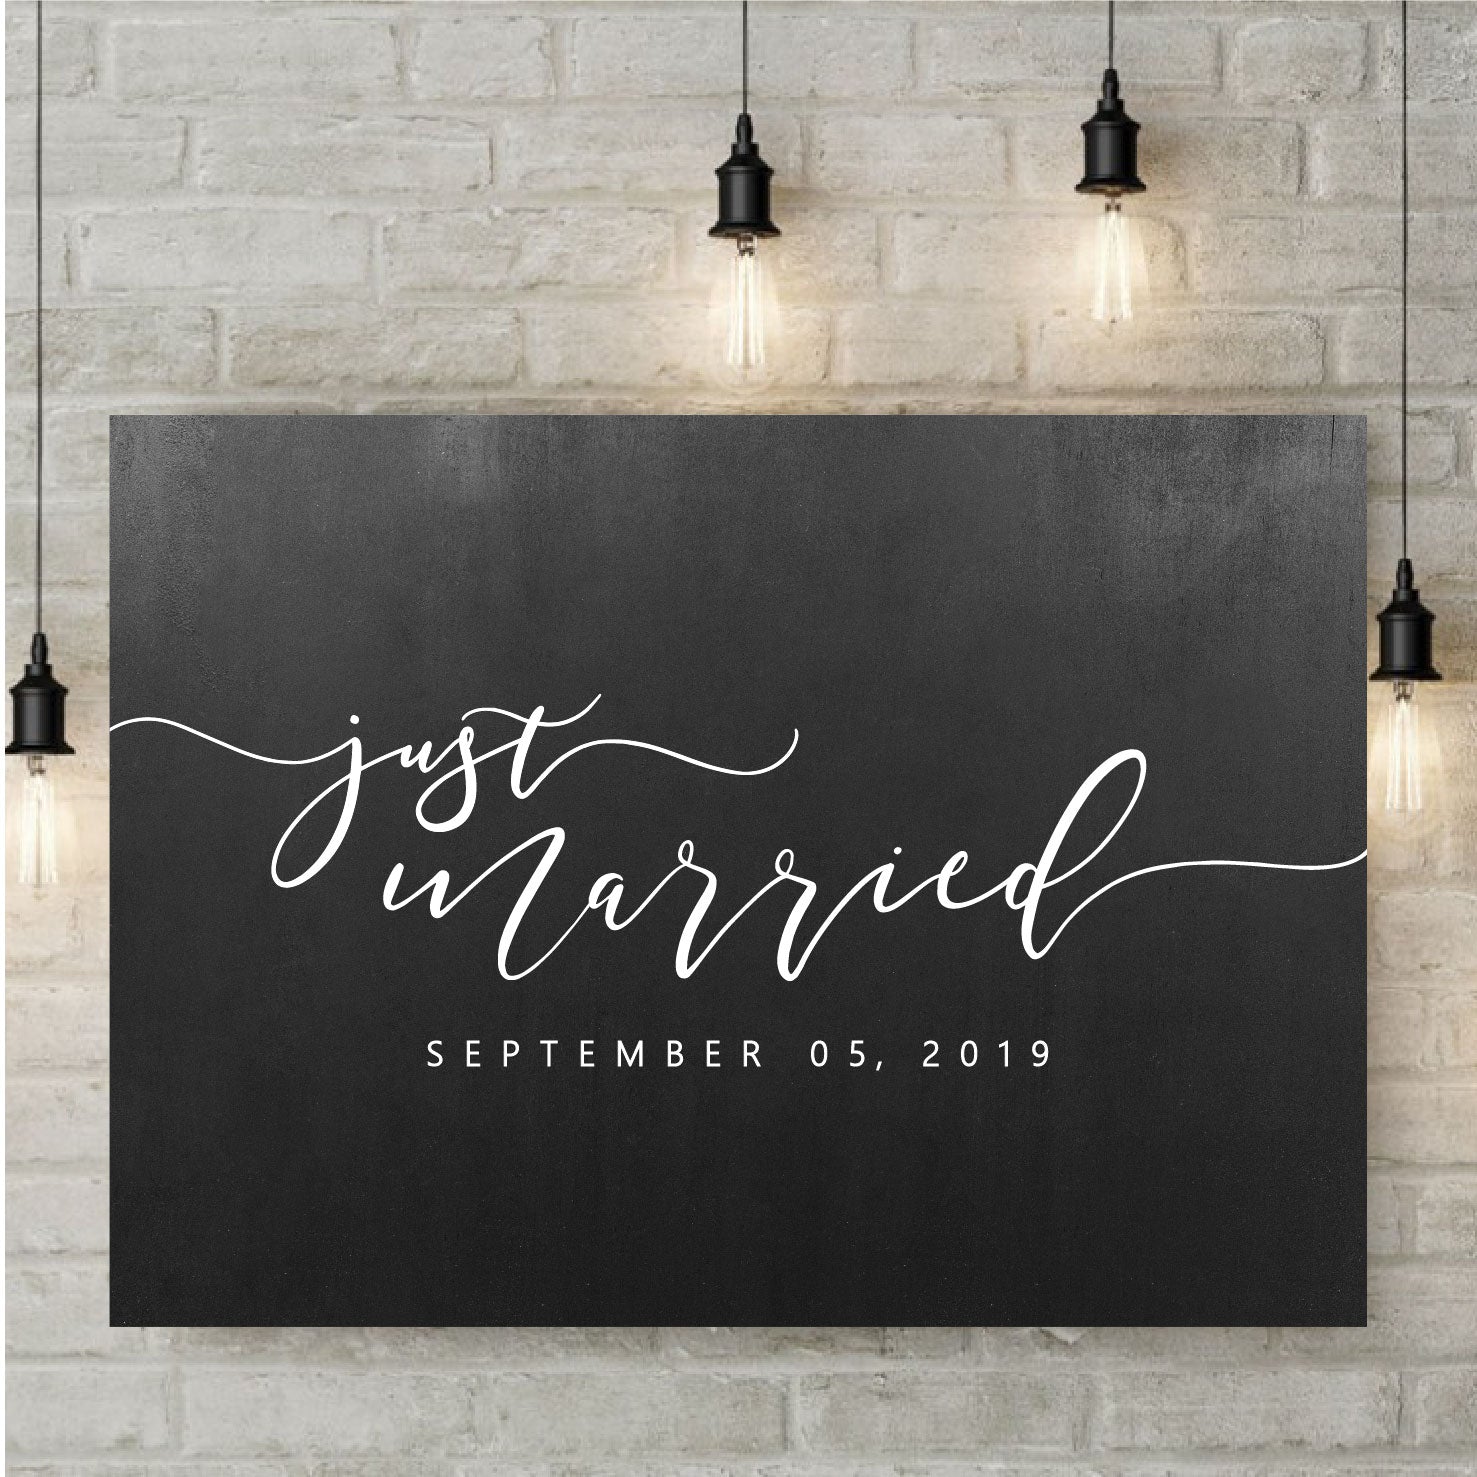 Just Married Wedding Sign Decal With Custom Date